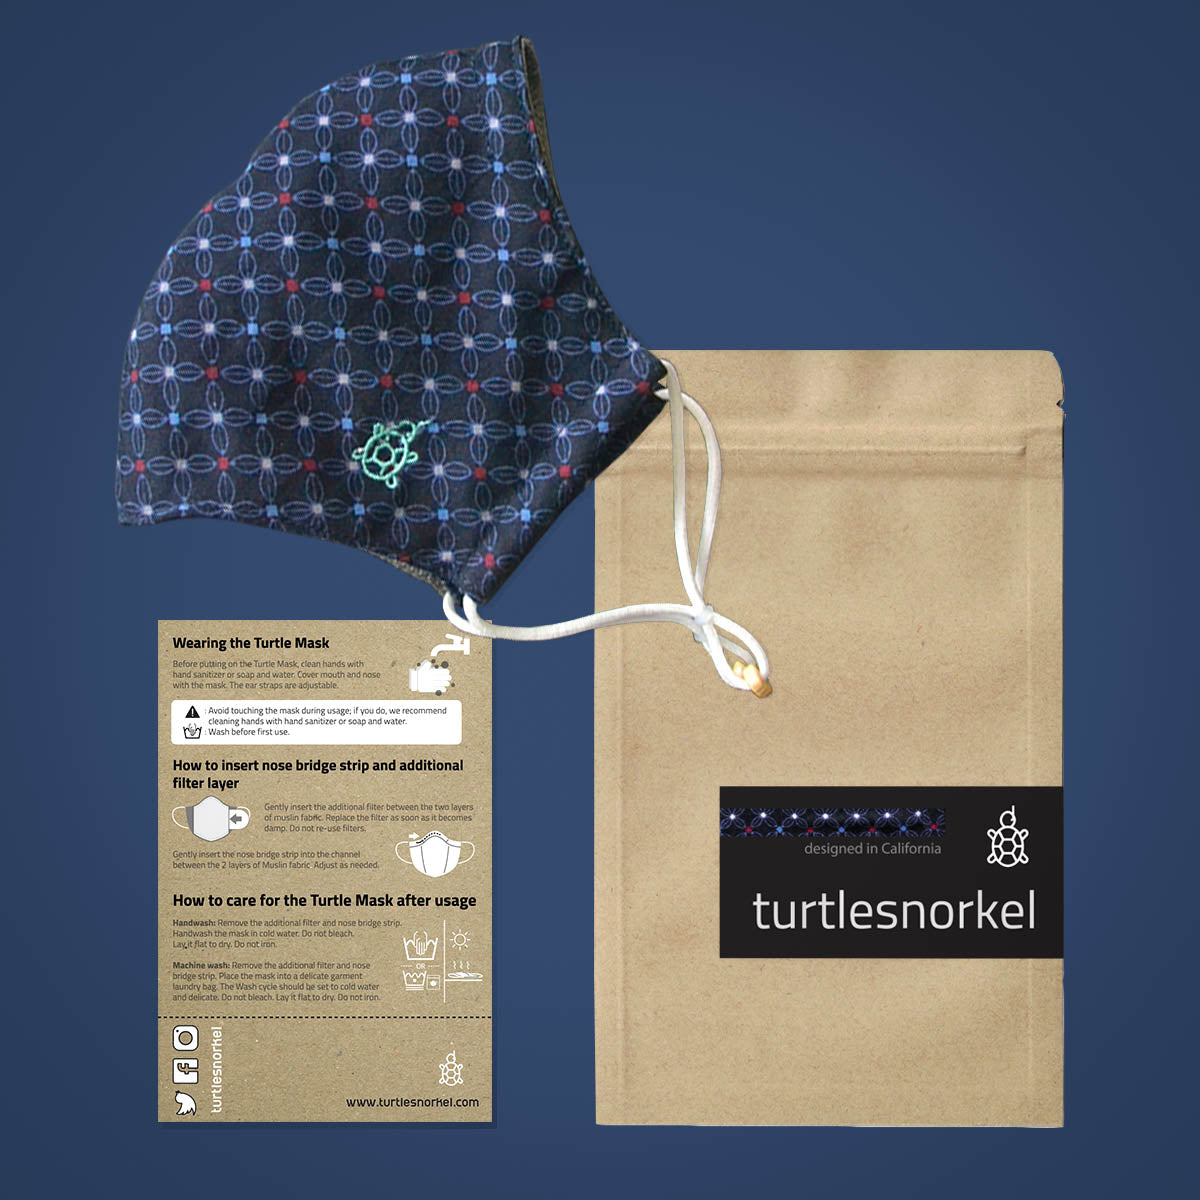 Turtle Mask 2.1 Navy Dots * Filter not included * Nose Bridge Wire Included  The inner layer is constructed with the same lightweight muslin cotton that helps reduce skin irritations and provide breathability. The special inner sleeve pocket houses insertable filters that help reduce symptoms from dust, air pollution, allergies and other airborne contaminants.   The mask's outer layer comes in various styles and patterns, making it fun and fashionable.